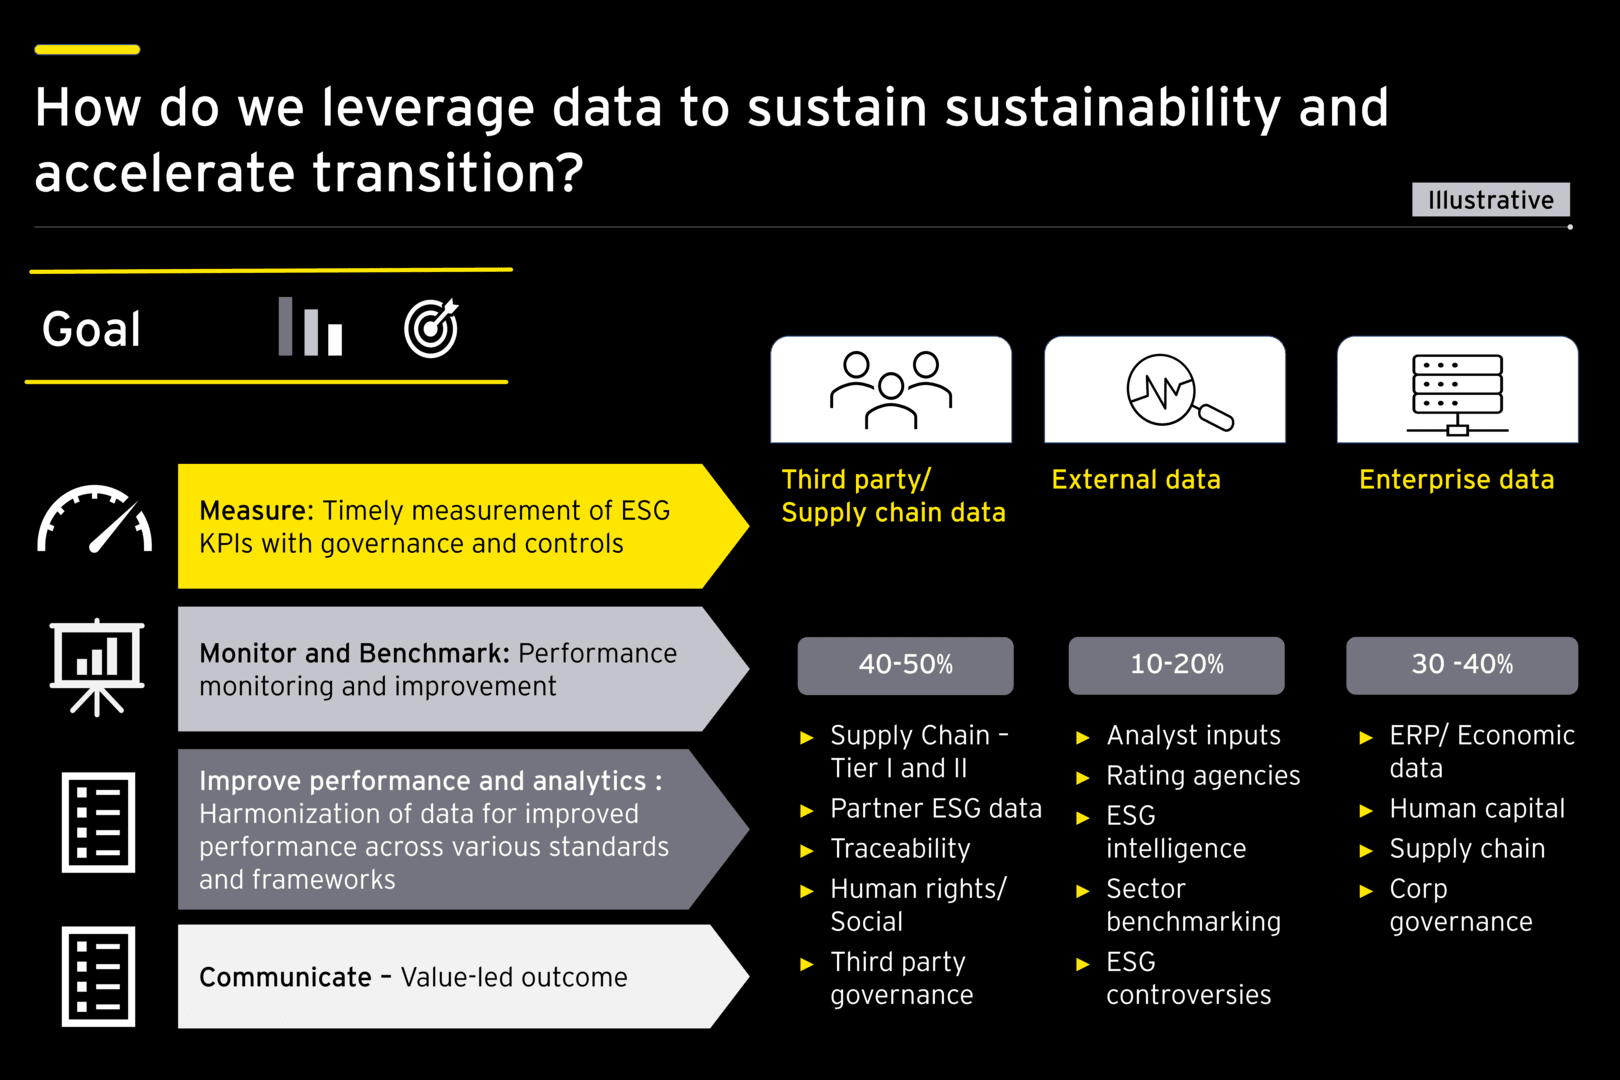 How do we leverage data to sustain sustainability and accelerate transition?